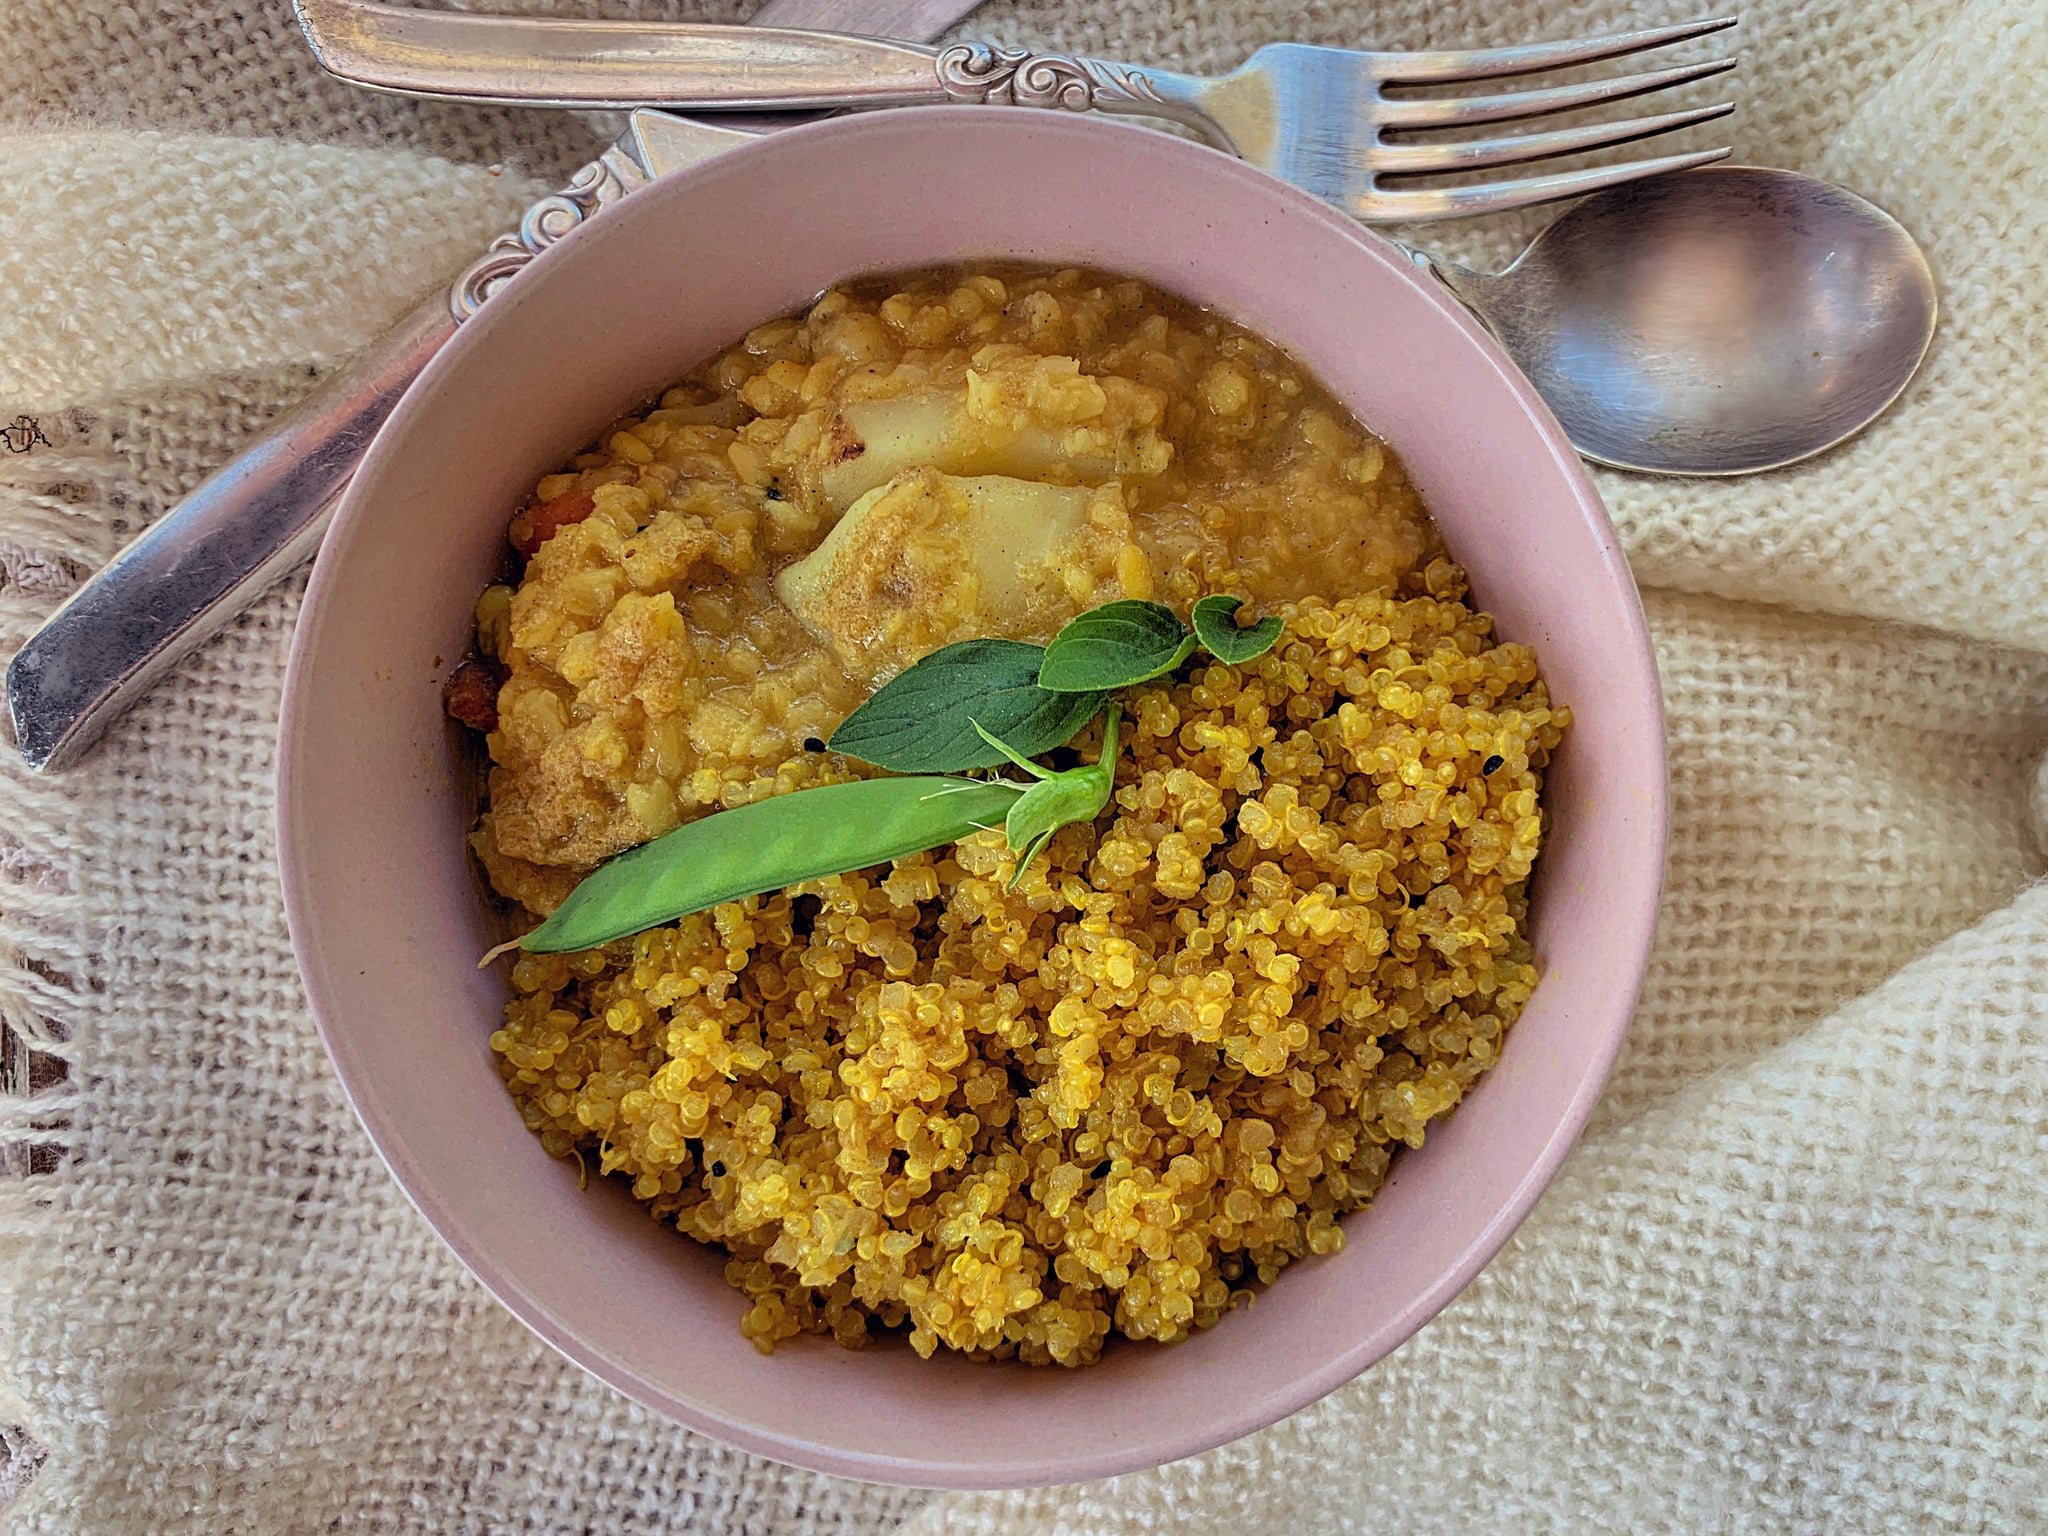 The meal suggestion features yellow moong dhal and organic quinoa curry. the perfect nutrient rich meal, full of protein, calcium, plant based omegas 